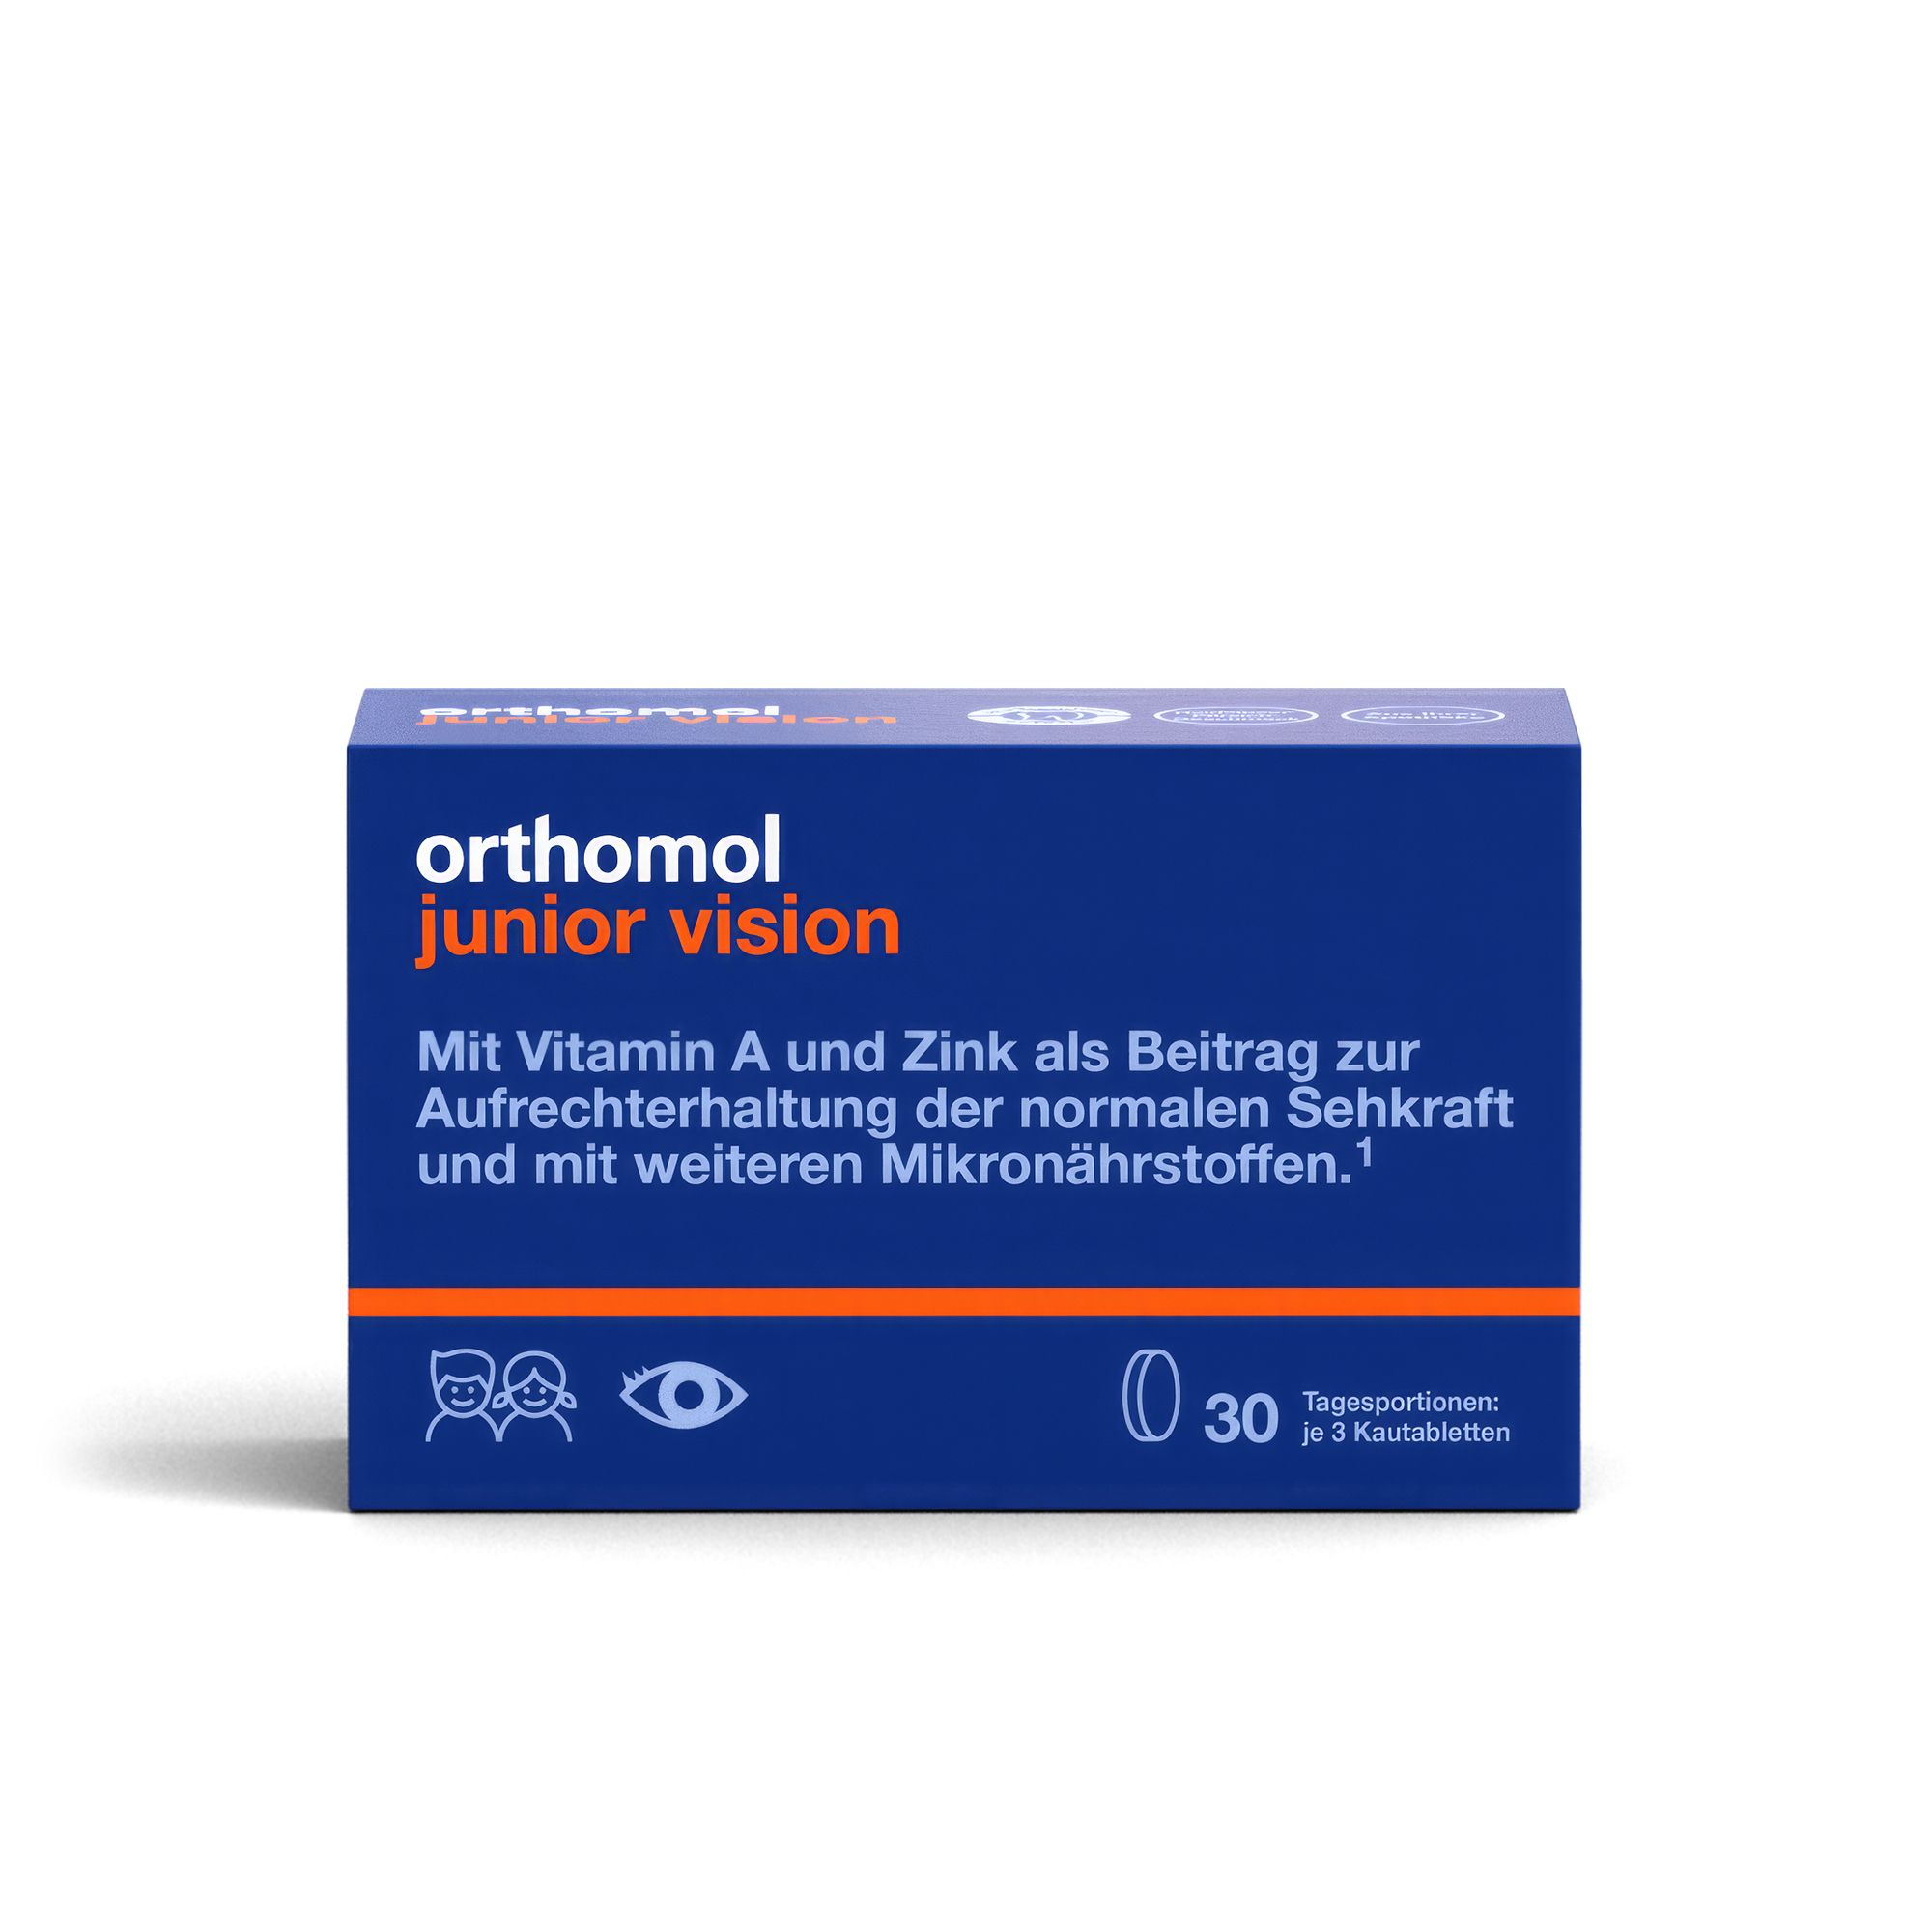 Orthomol junior vision - micronutrients to maintain vision in children - with vitamin A and zinc - chewing tablets